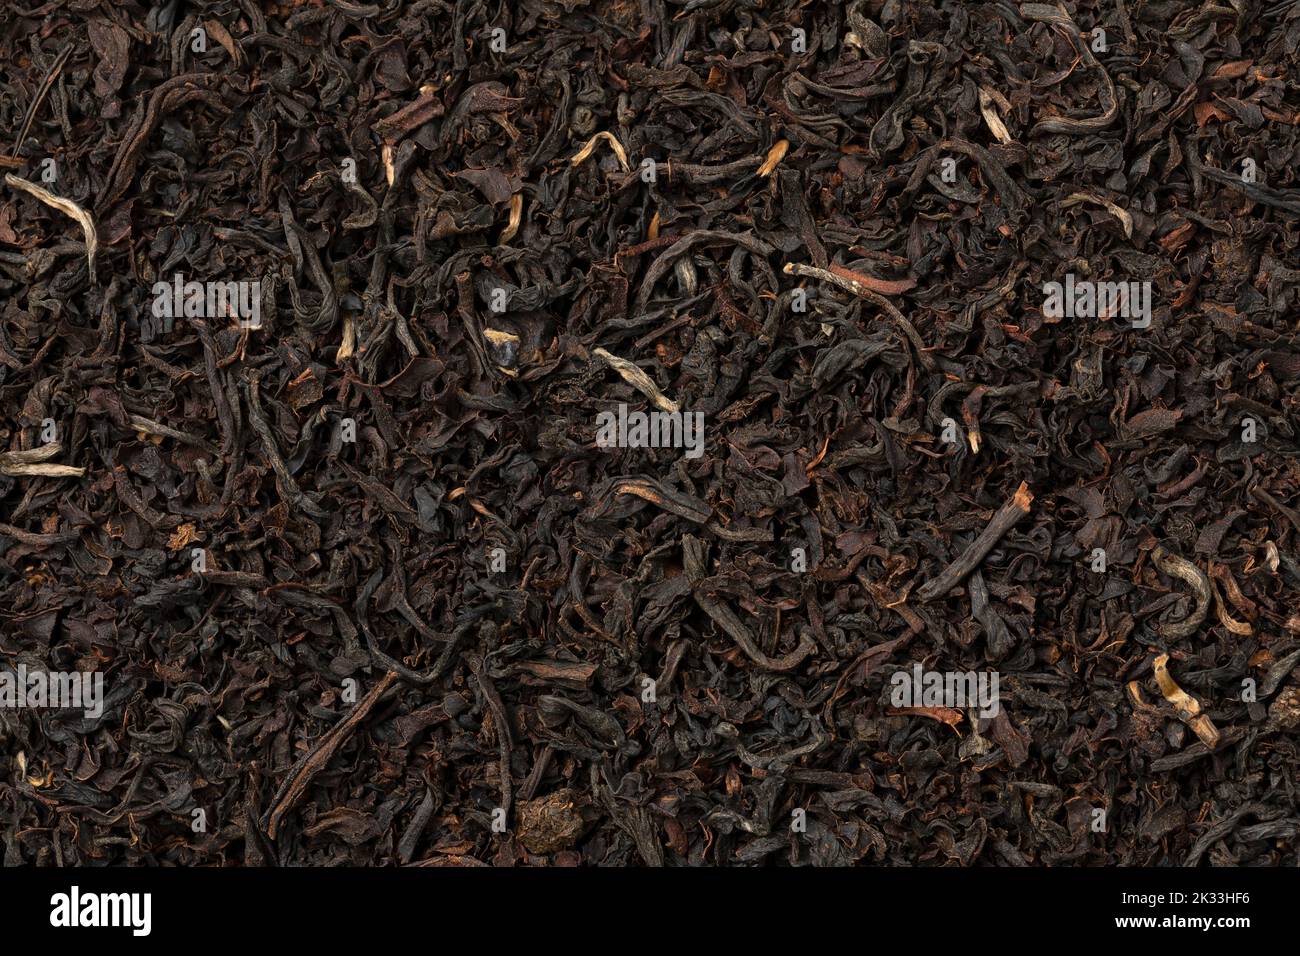 Dried Ostfriesen tea leaves full frame close up as background Stock Photo